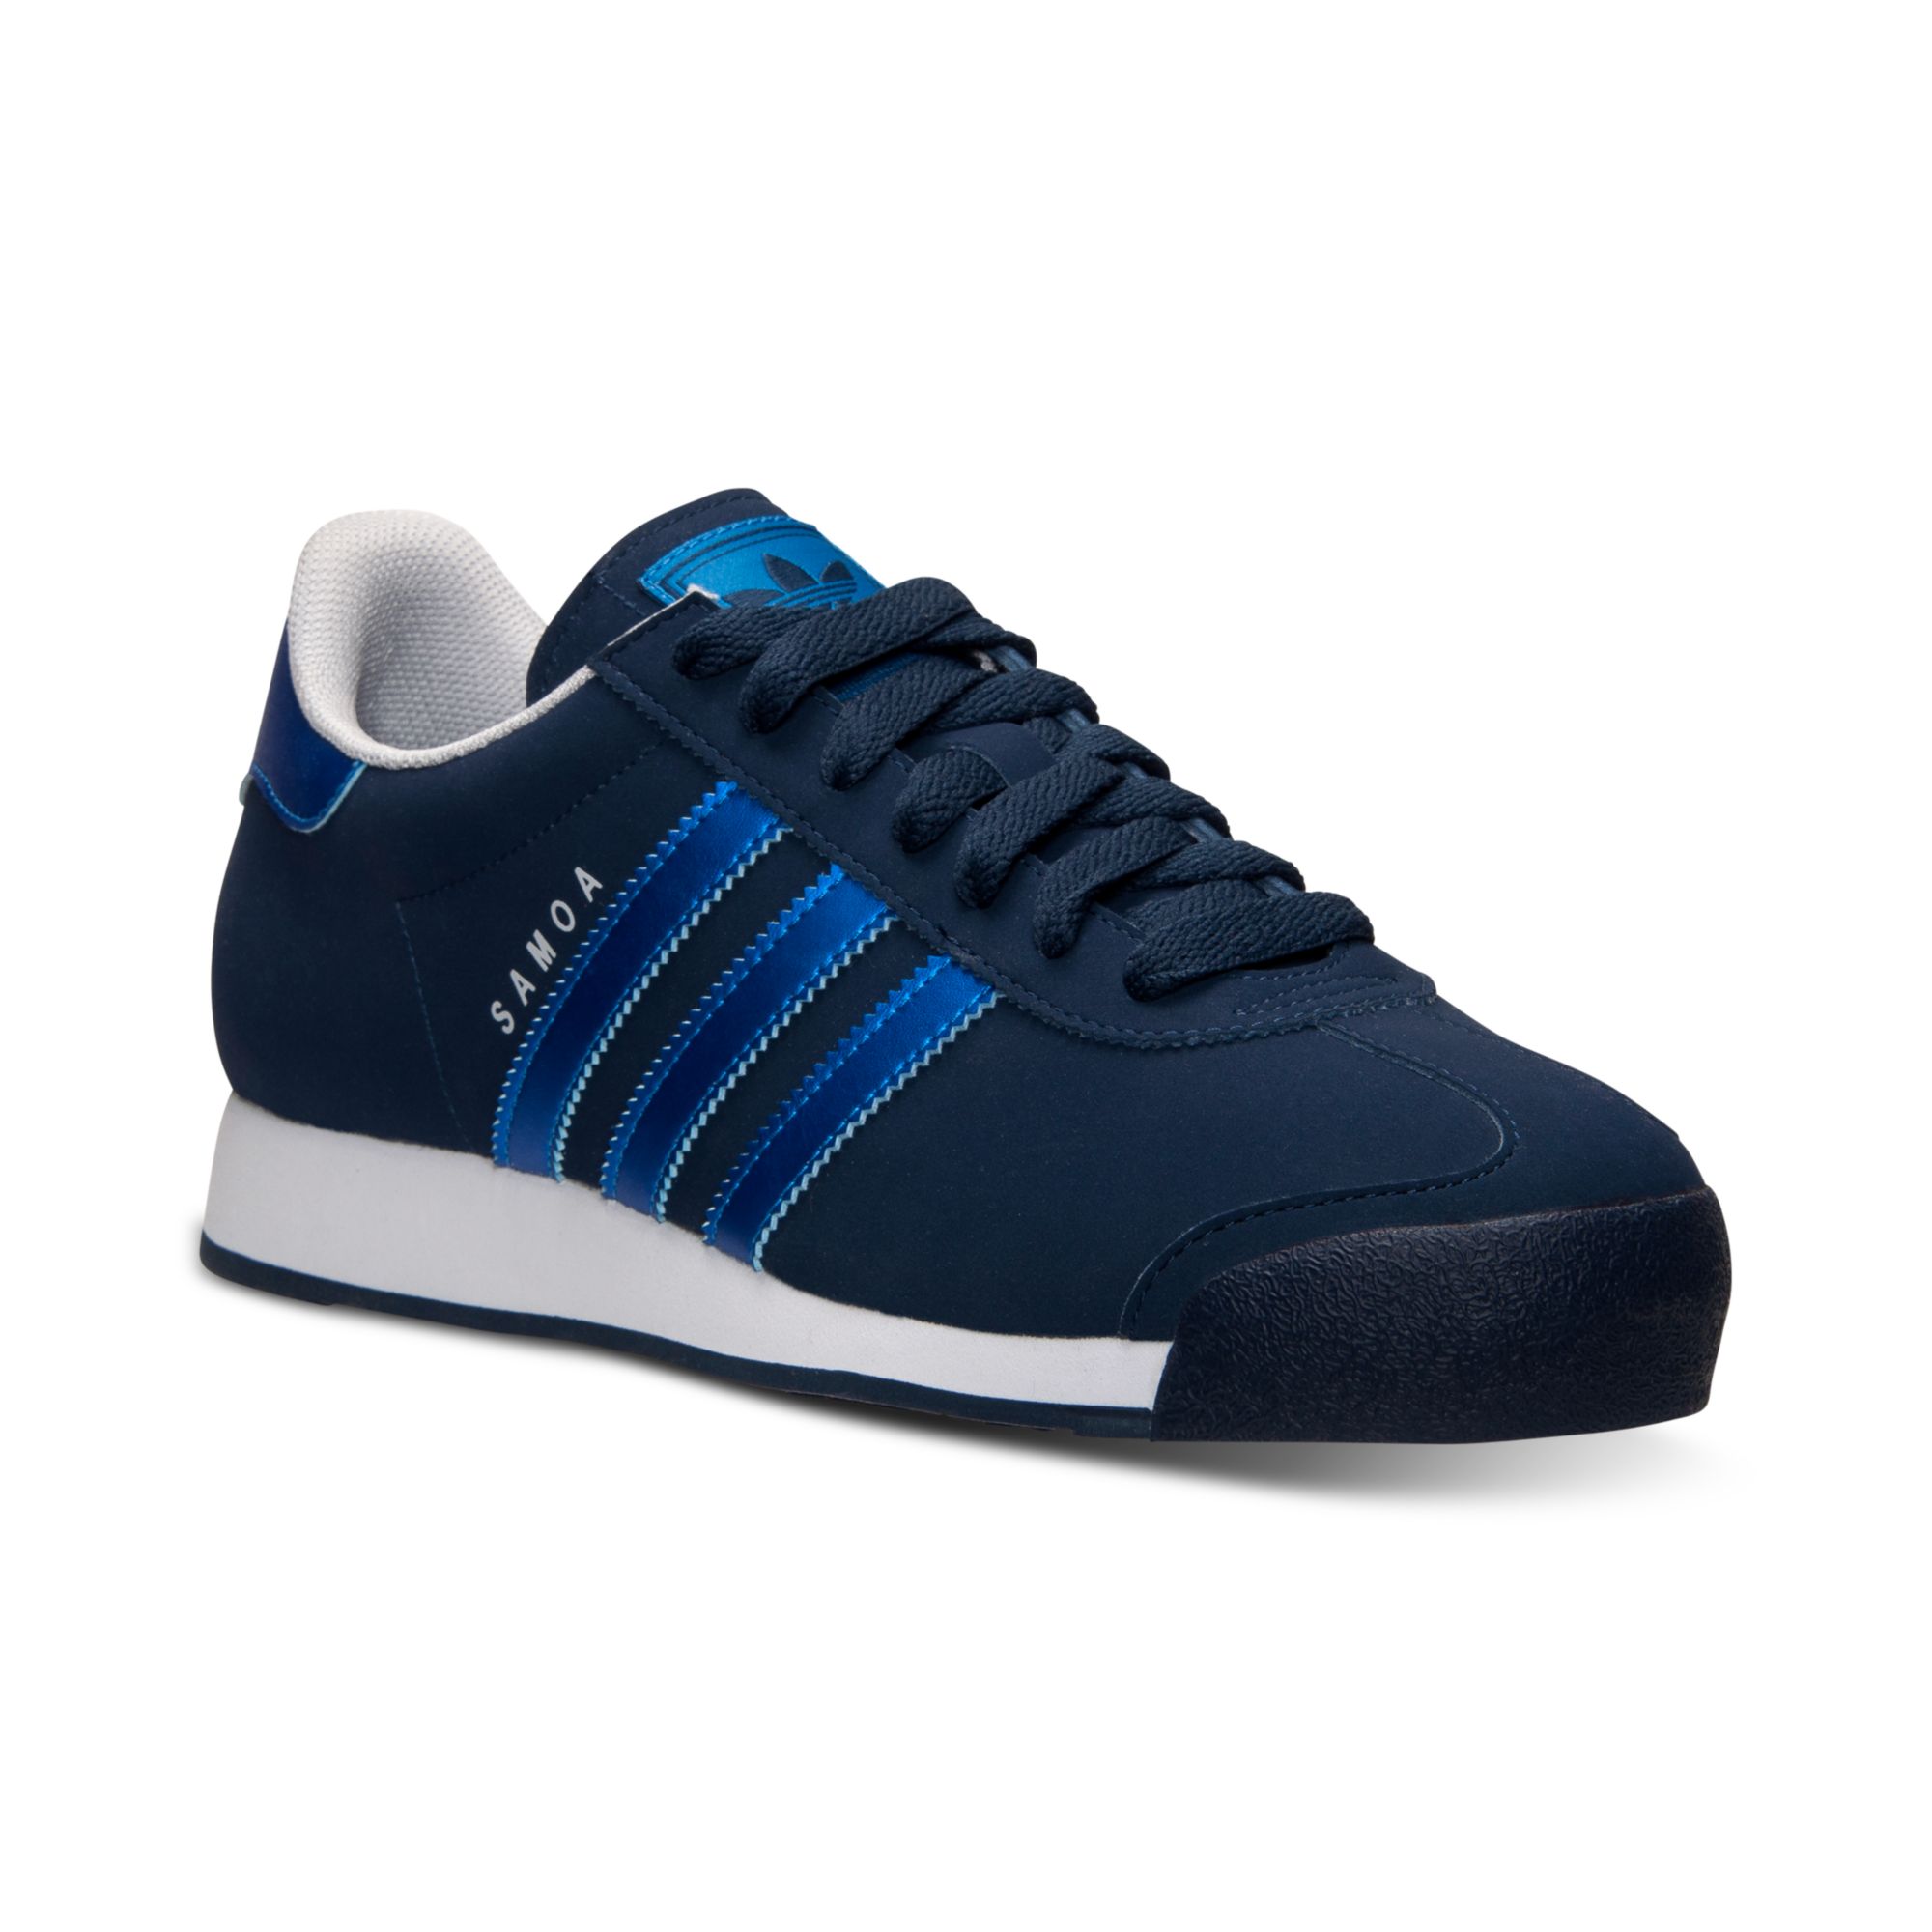 adidas Men'S Samoa Casual Sneakers From Finish Line in Navy/Blue/White